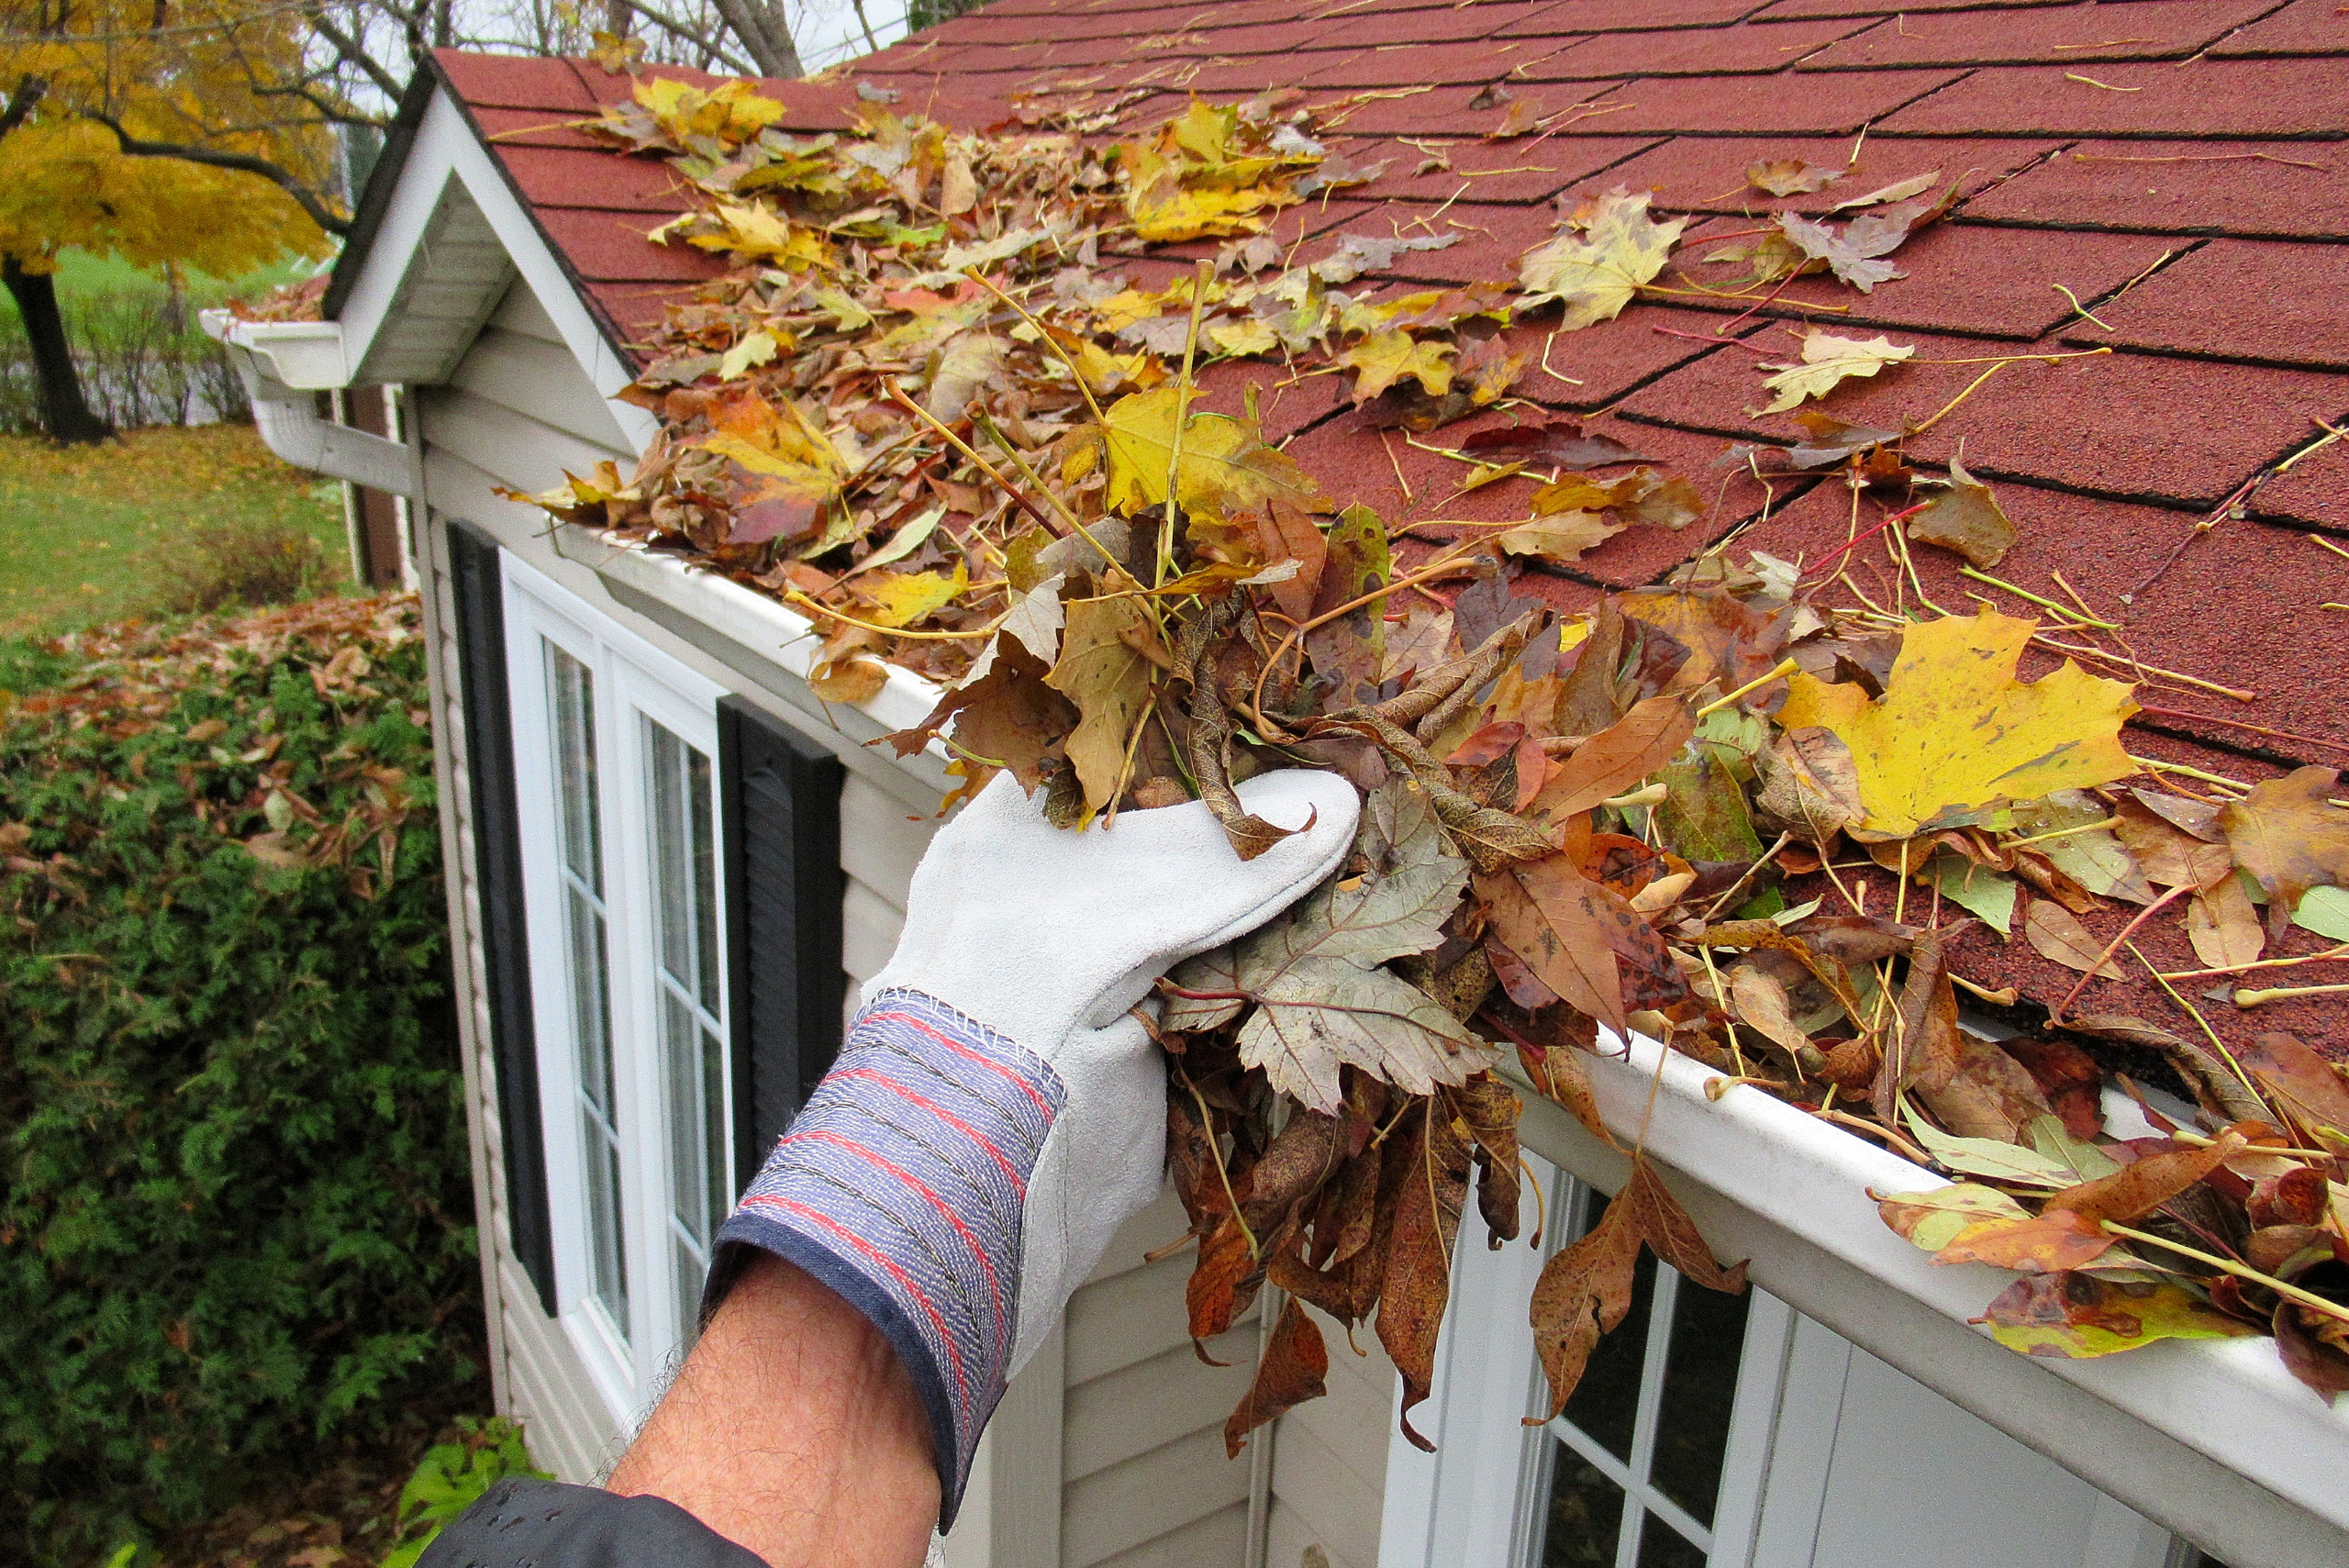 A person removing fall leaves from home gutters.